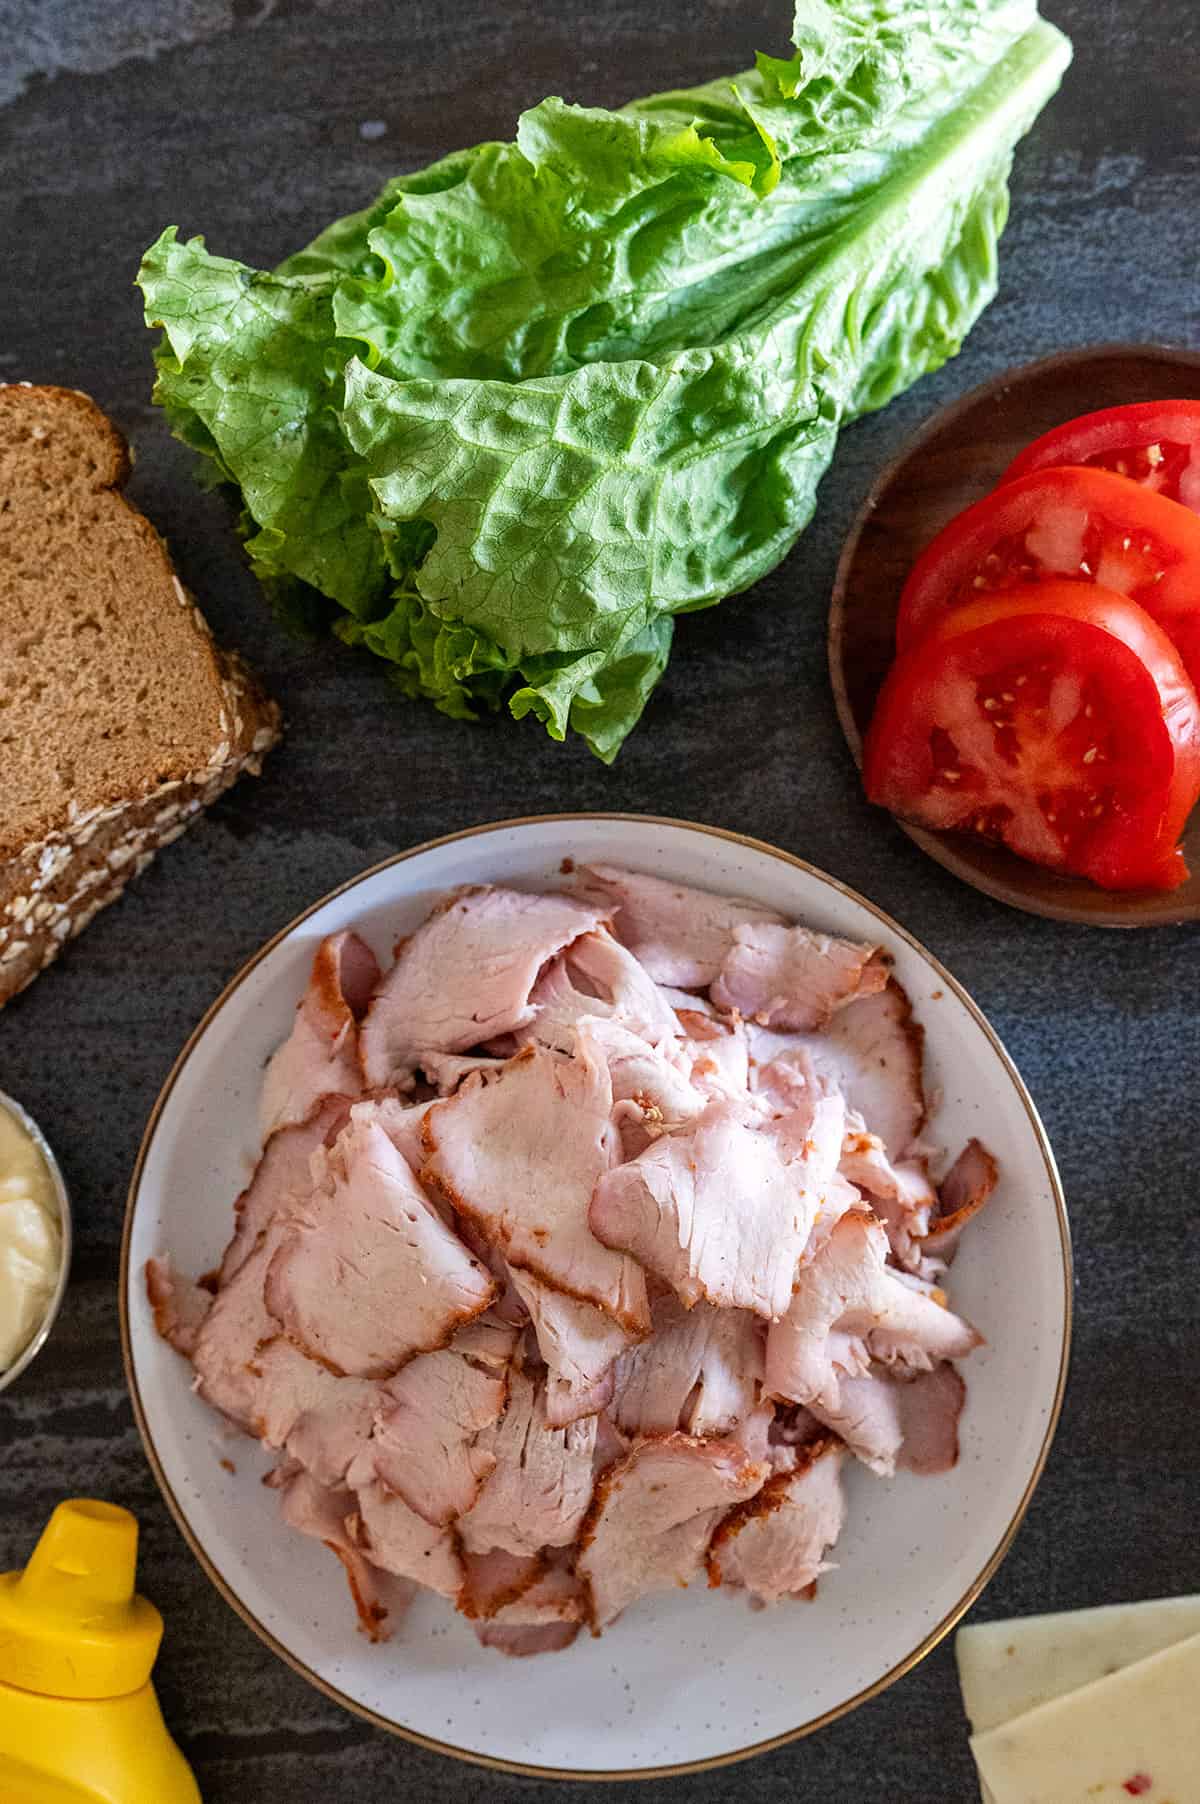 Plate of smoked pork lunch meat surrounded by sandwich ingredients.